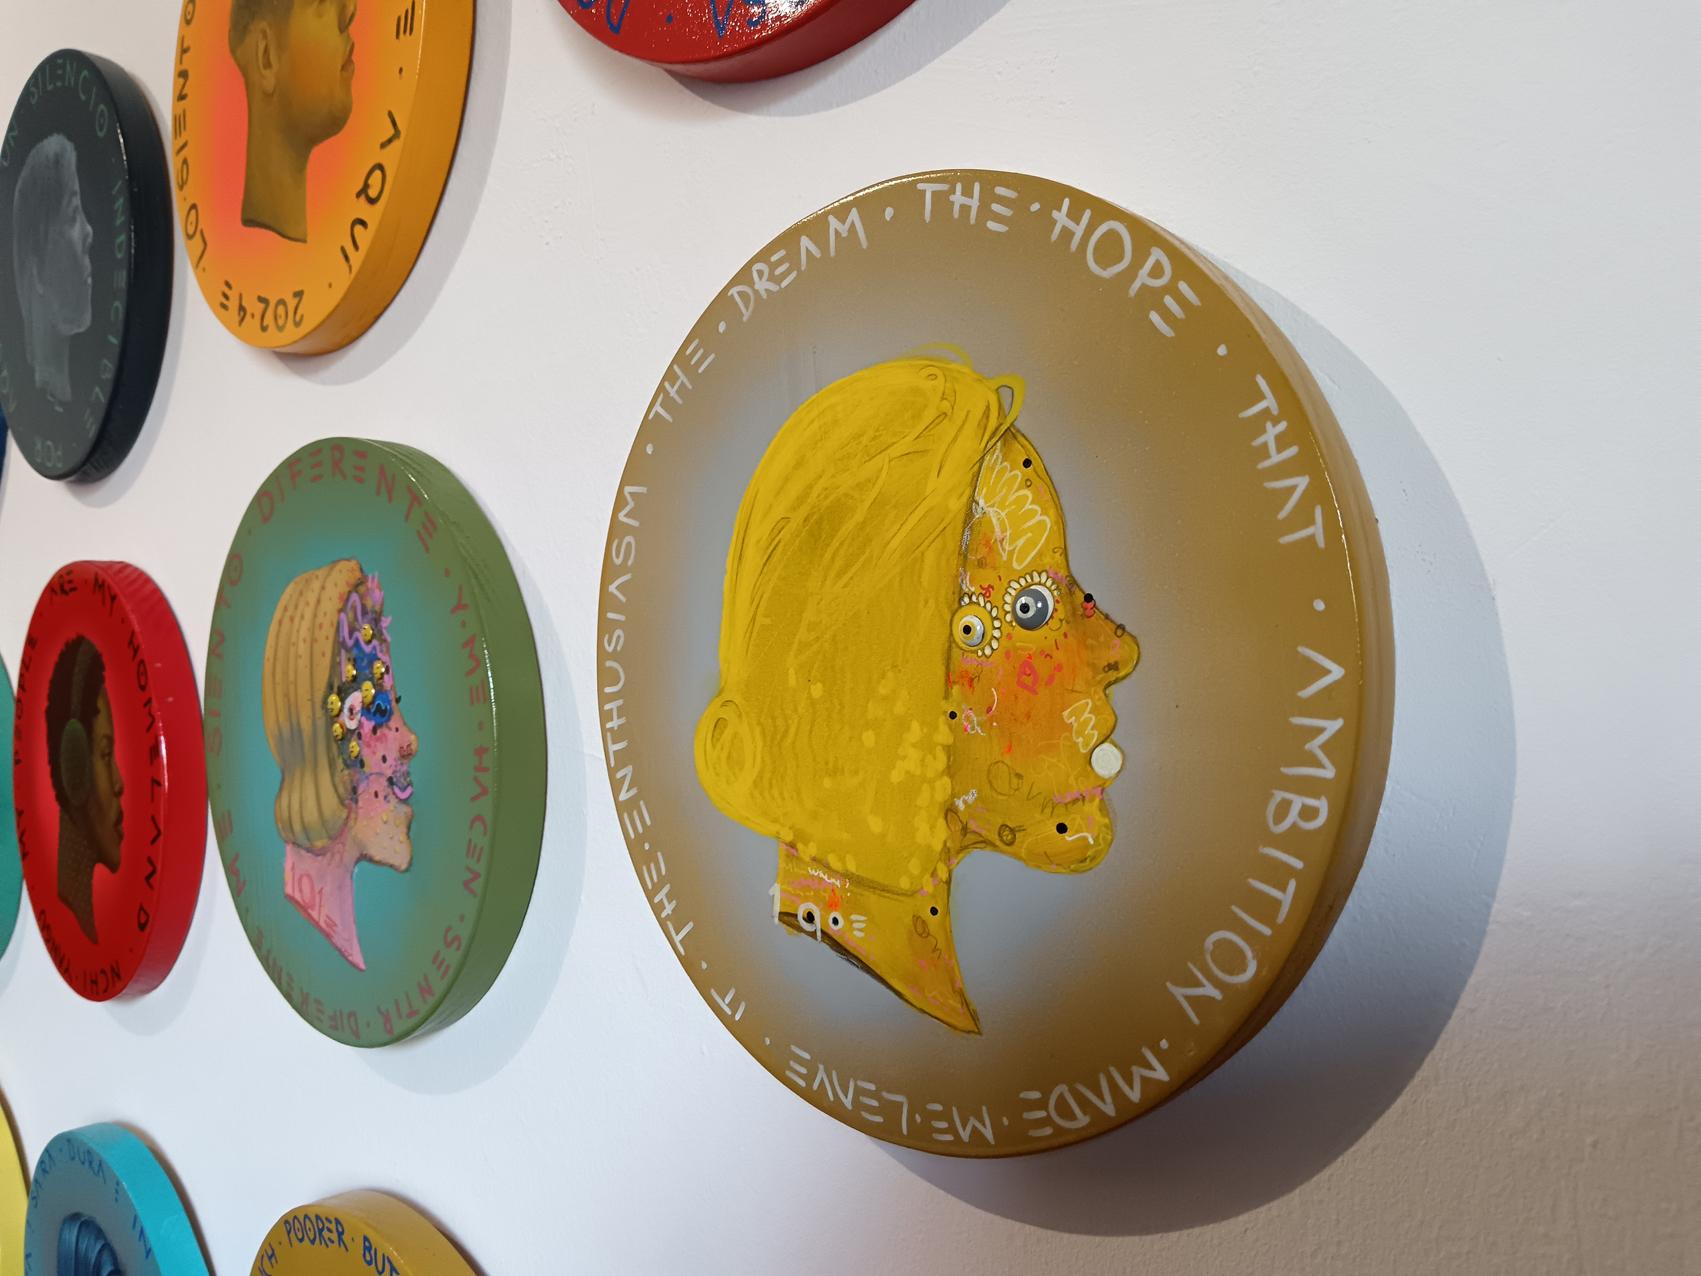 Surrealist Pop Portrait of a Woman in a Yellow Face Coin. 